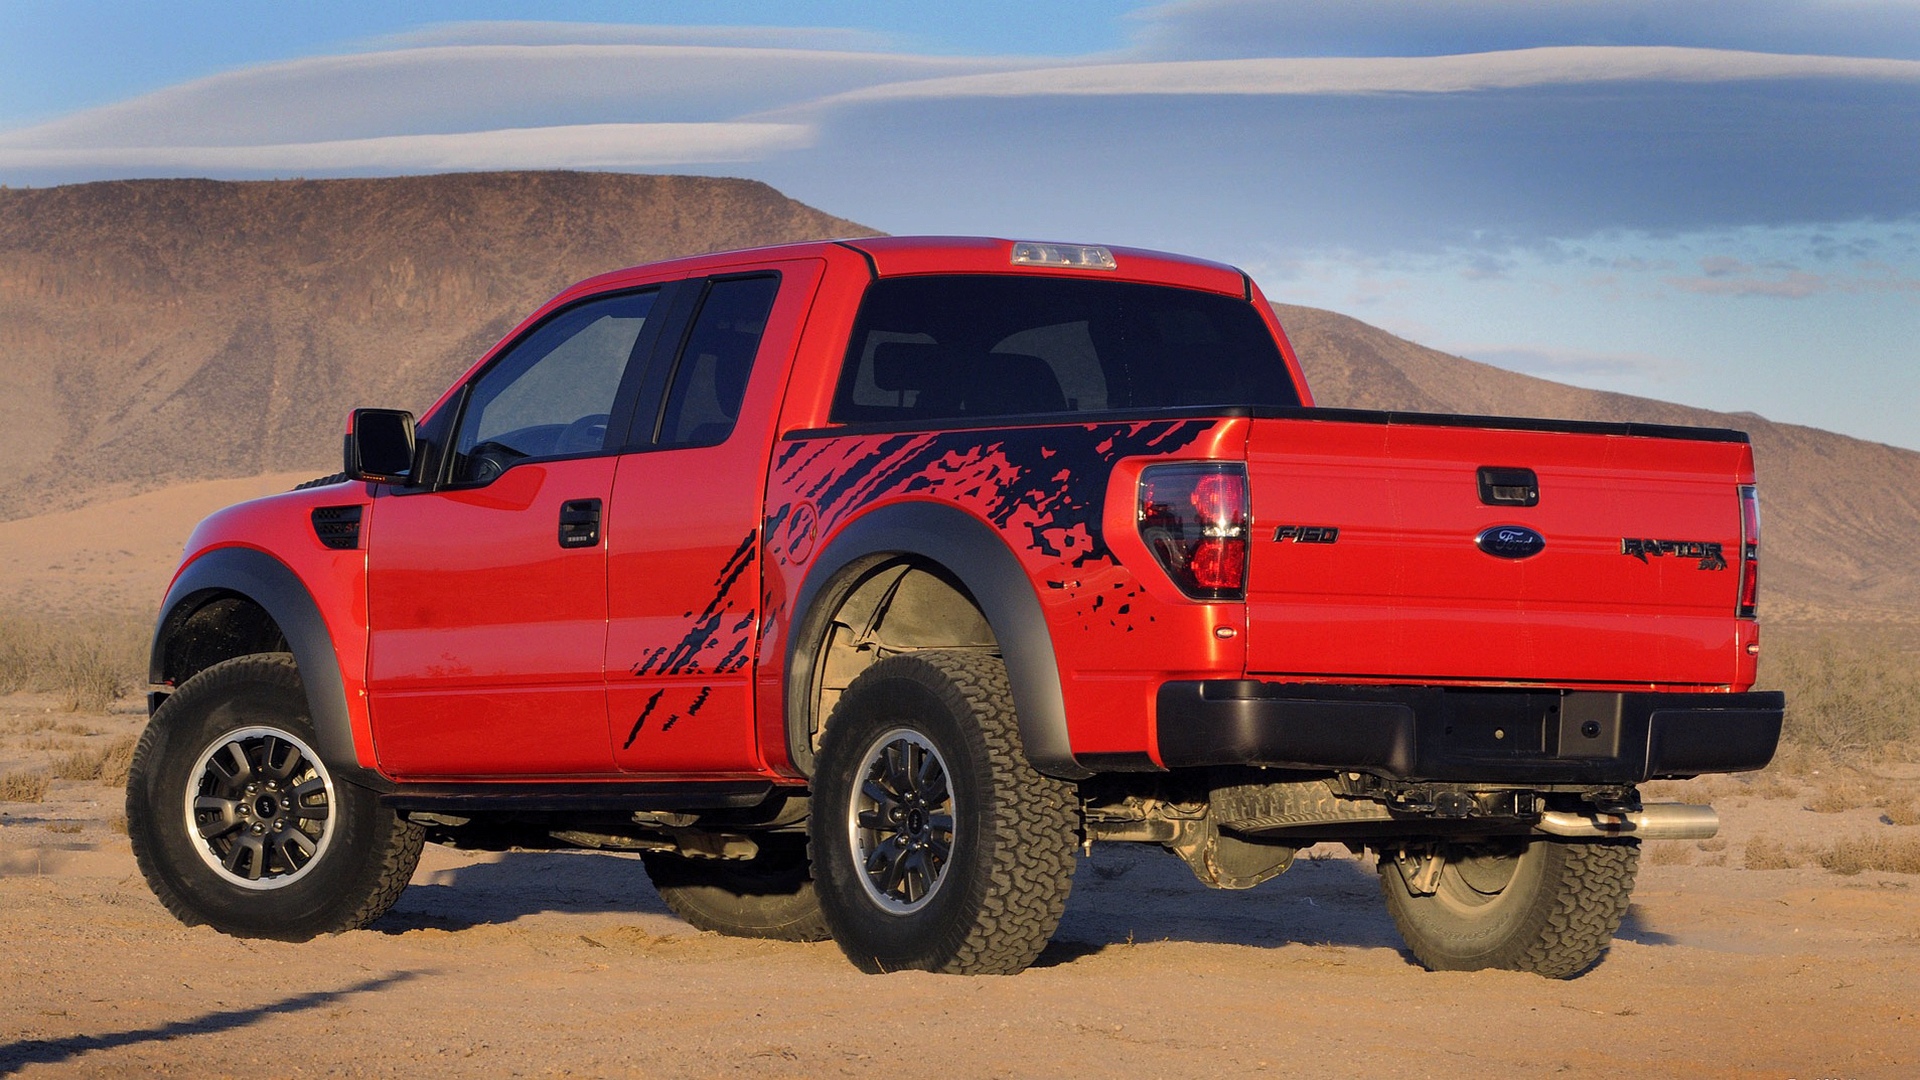 Vehicles Ford Raptor HD Wallpaper | Background Image